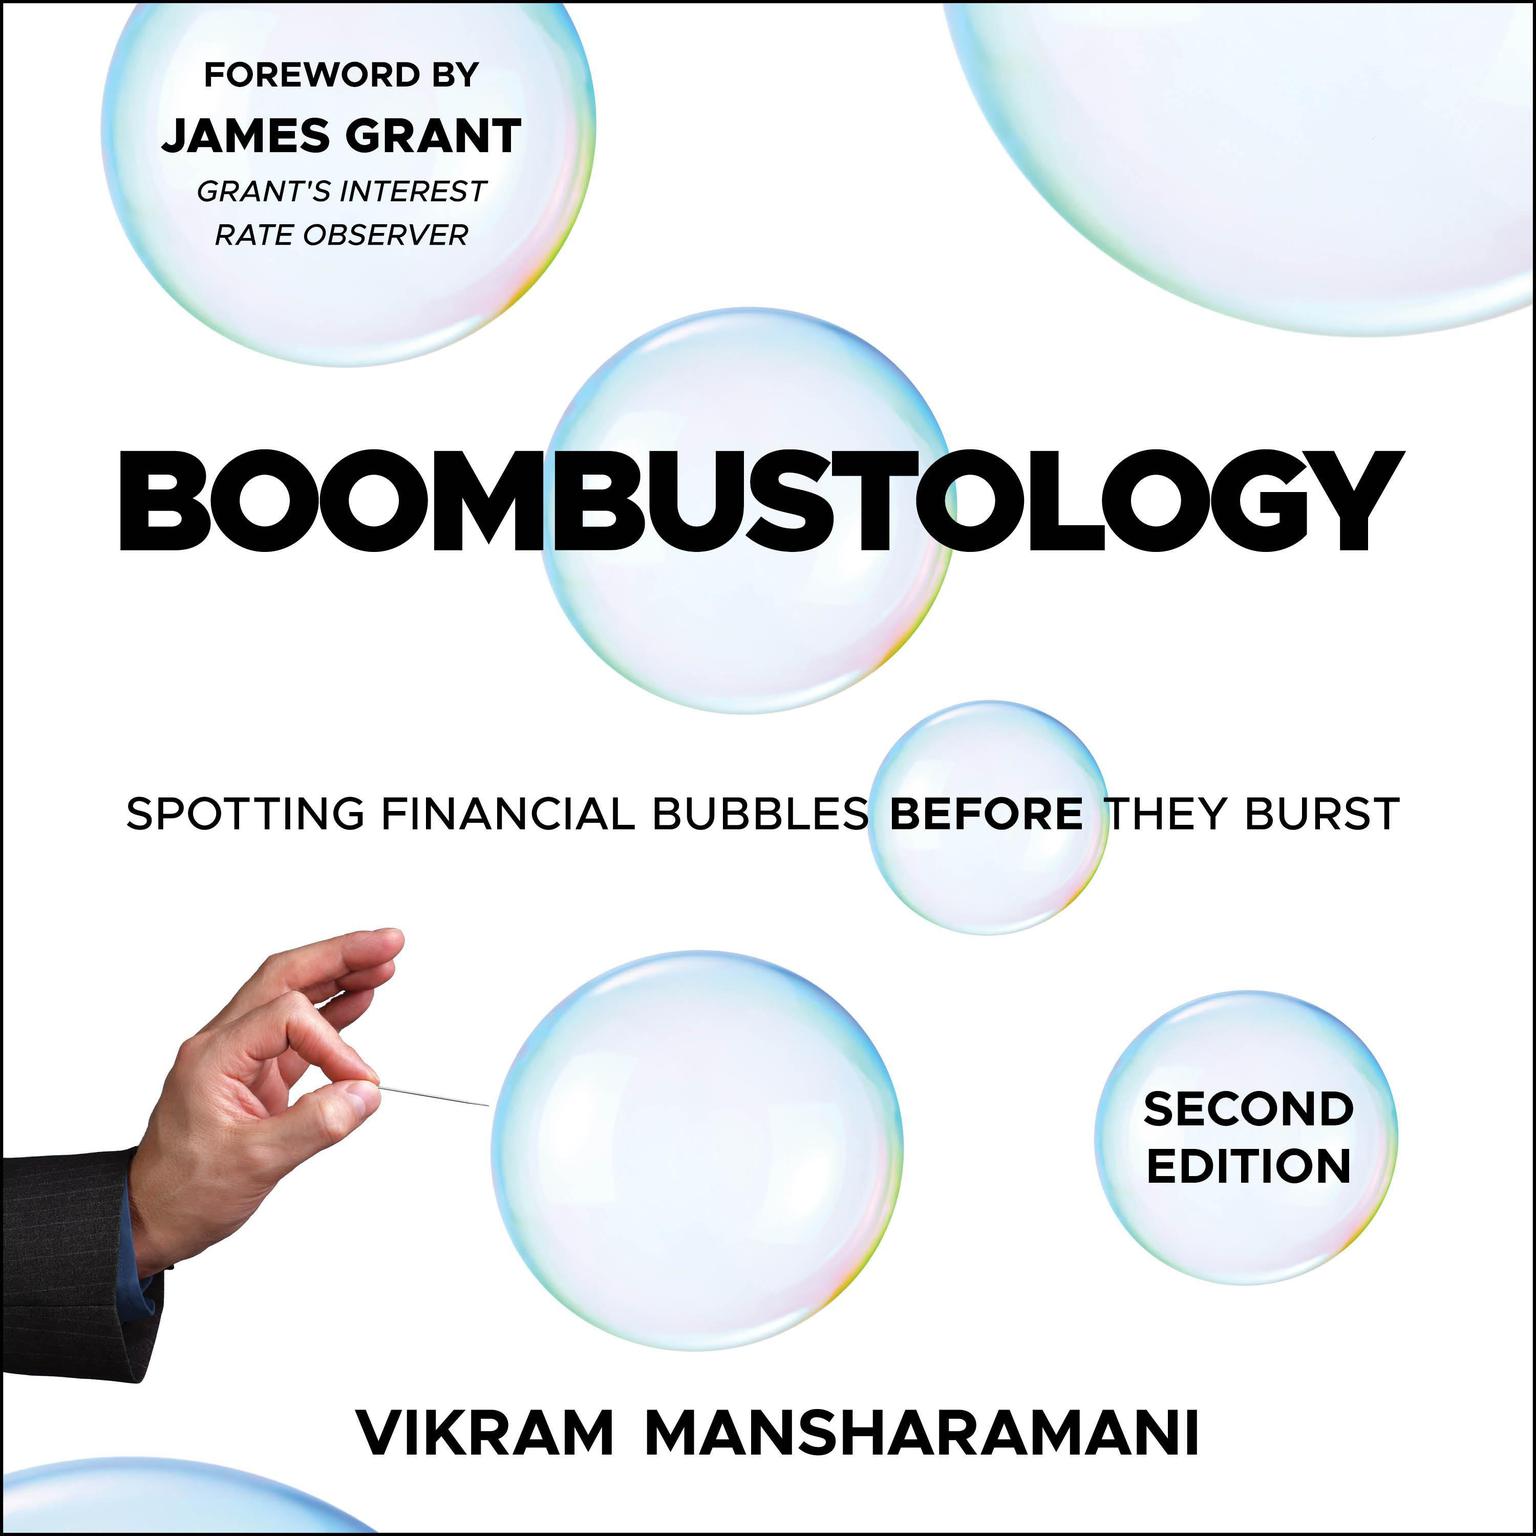 Boombustology: Spotting Financial Bubbles Before They Burst 2nd Edition Audiobook, by Vikram Mansharamani